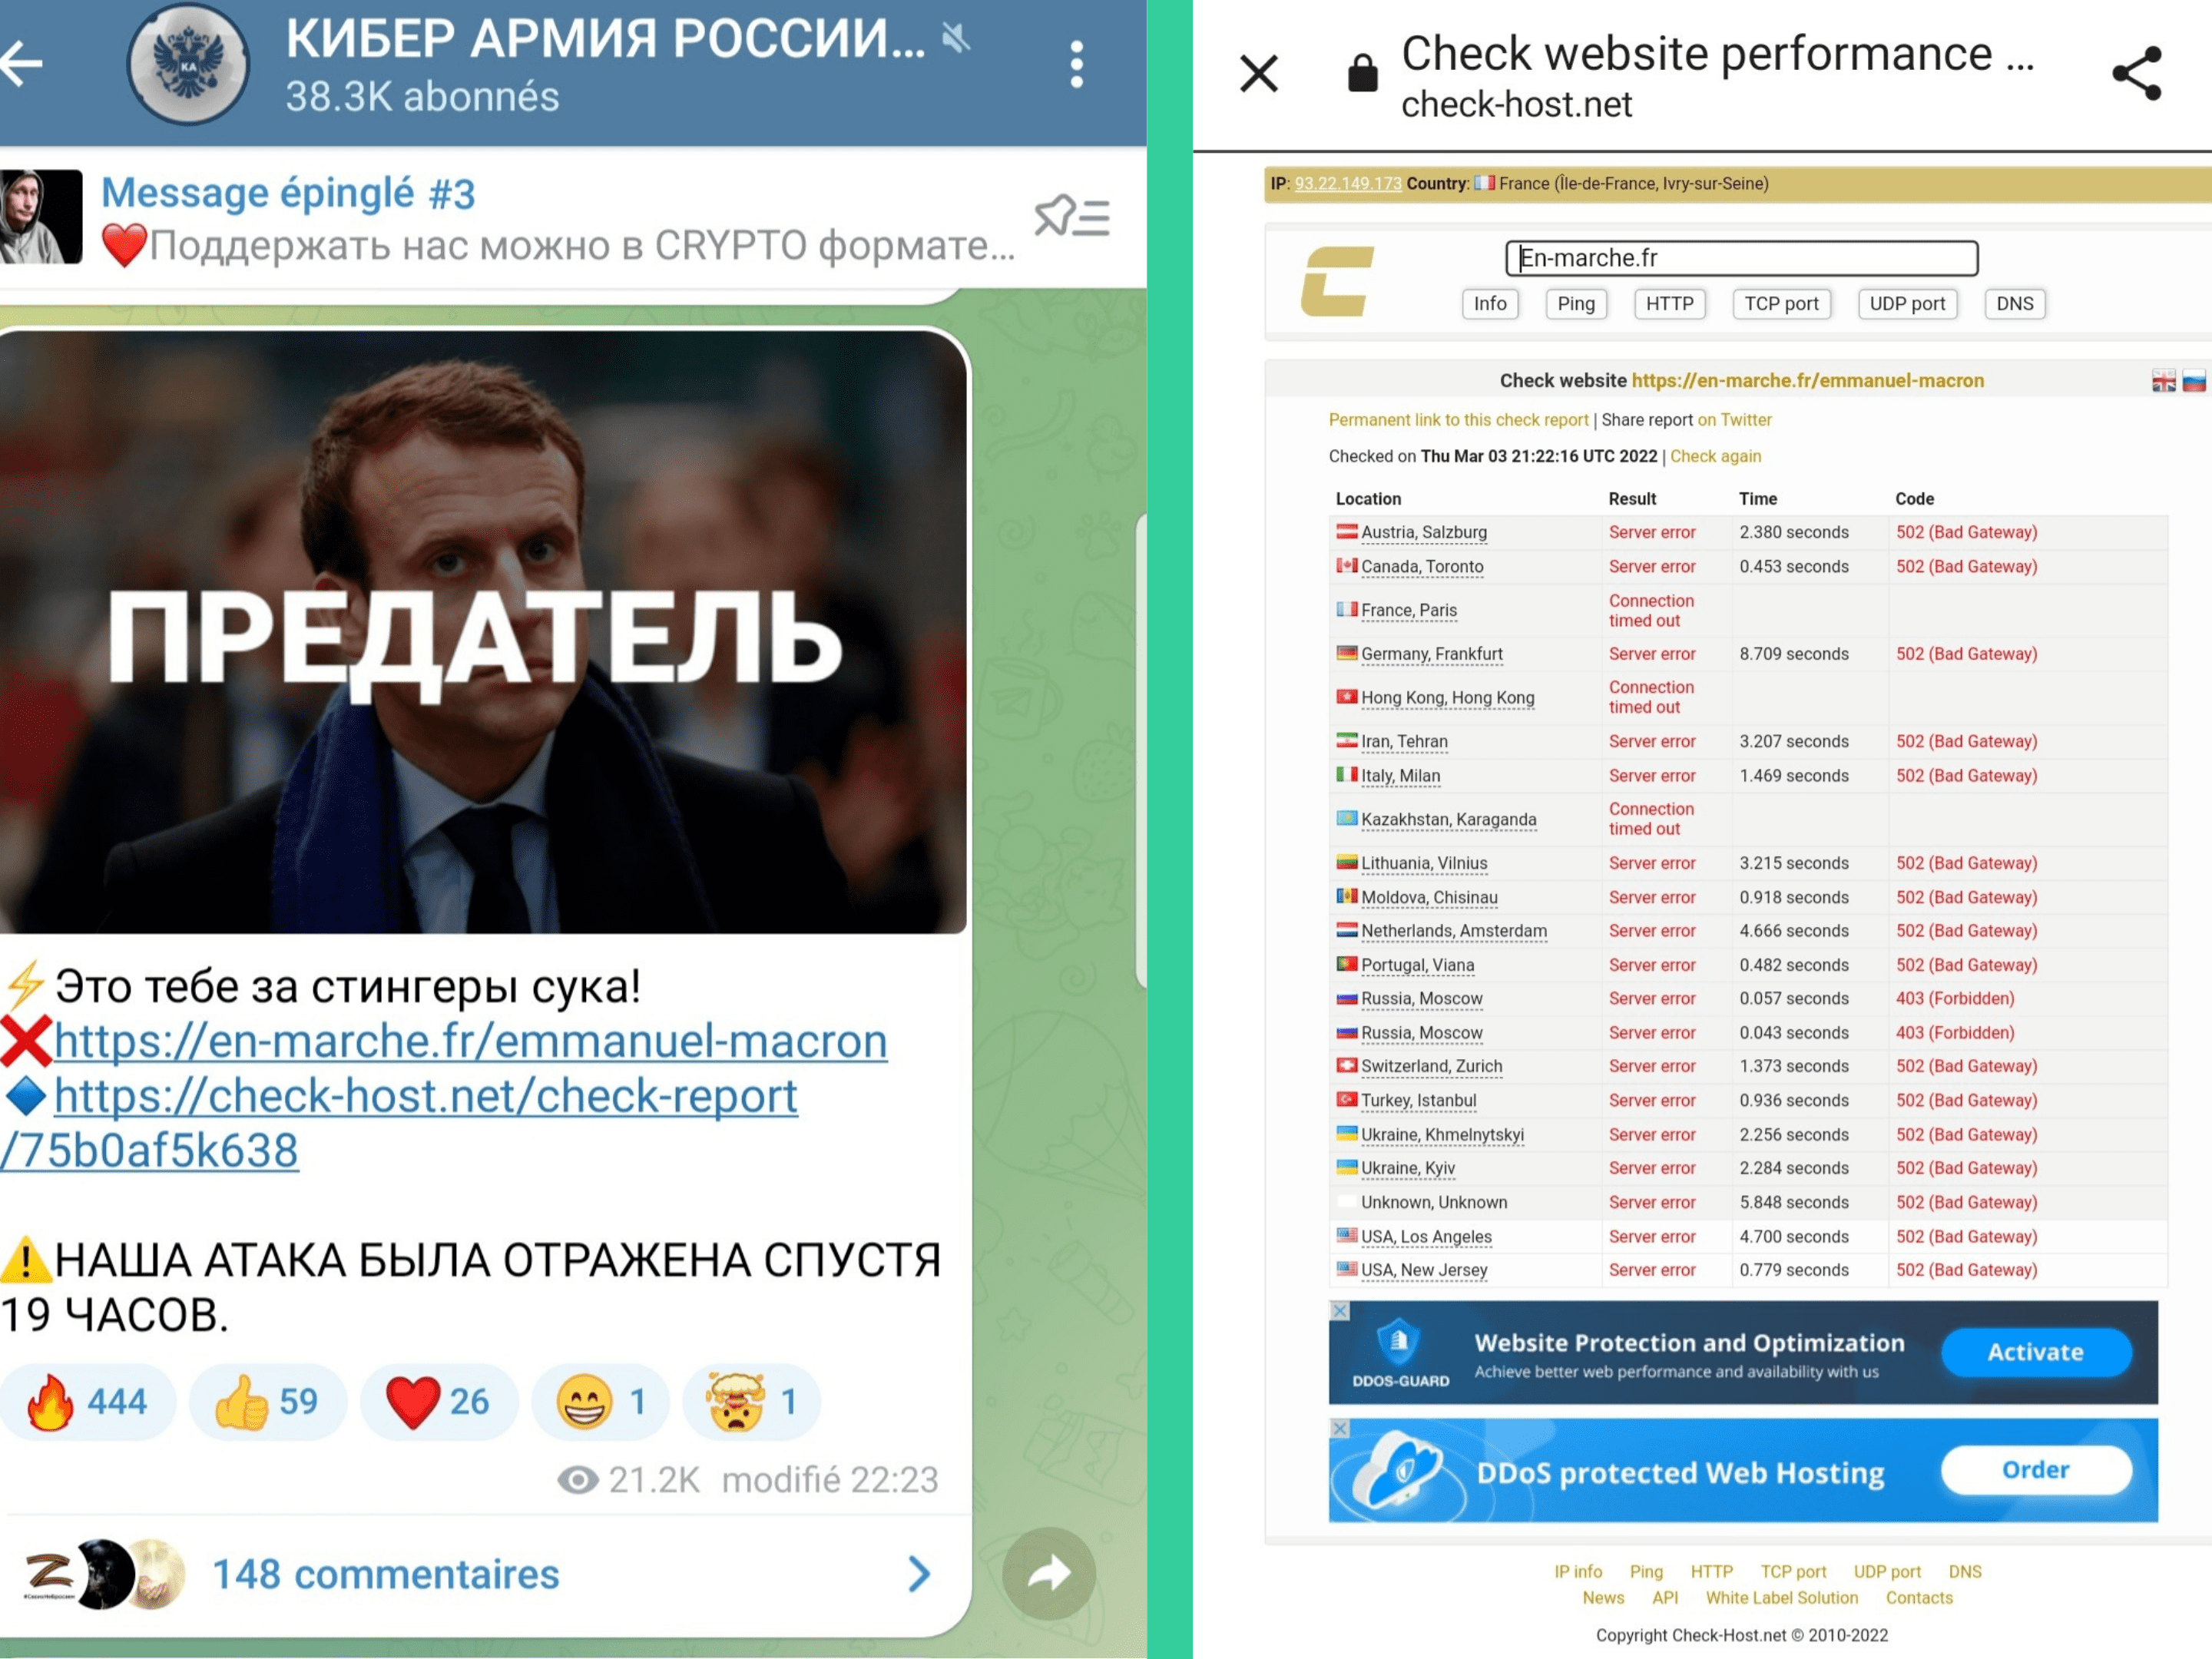 The message published on the Russian cyber army's Telegram channel congratulating itself on having brought down the LREM site. // Source: Numerama